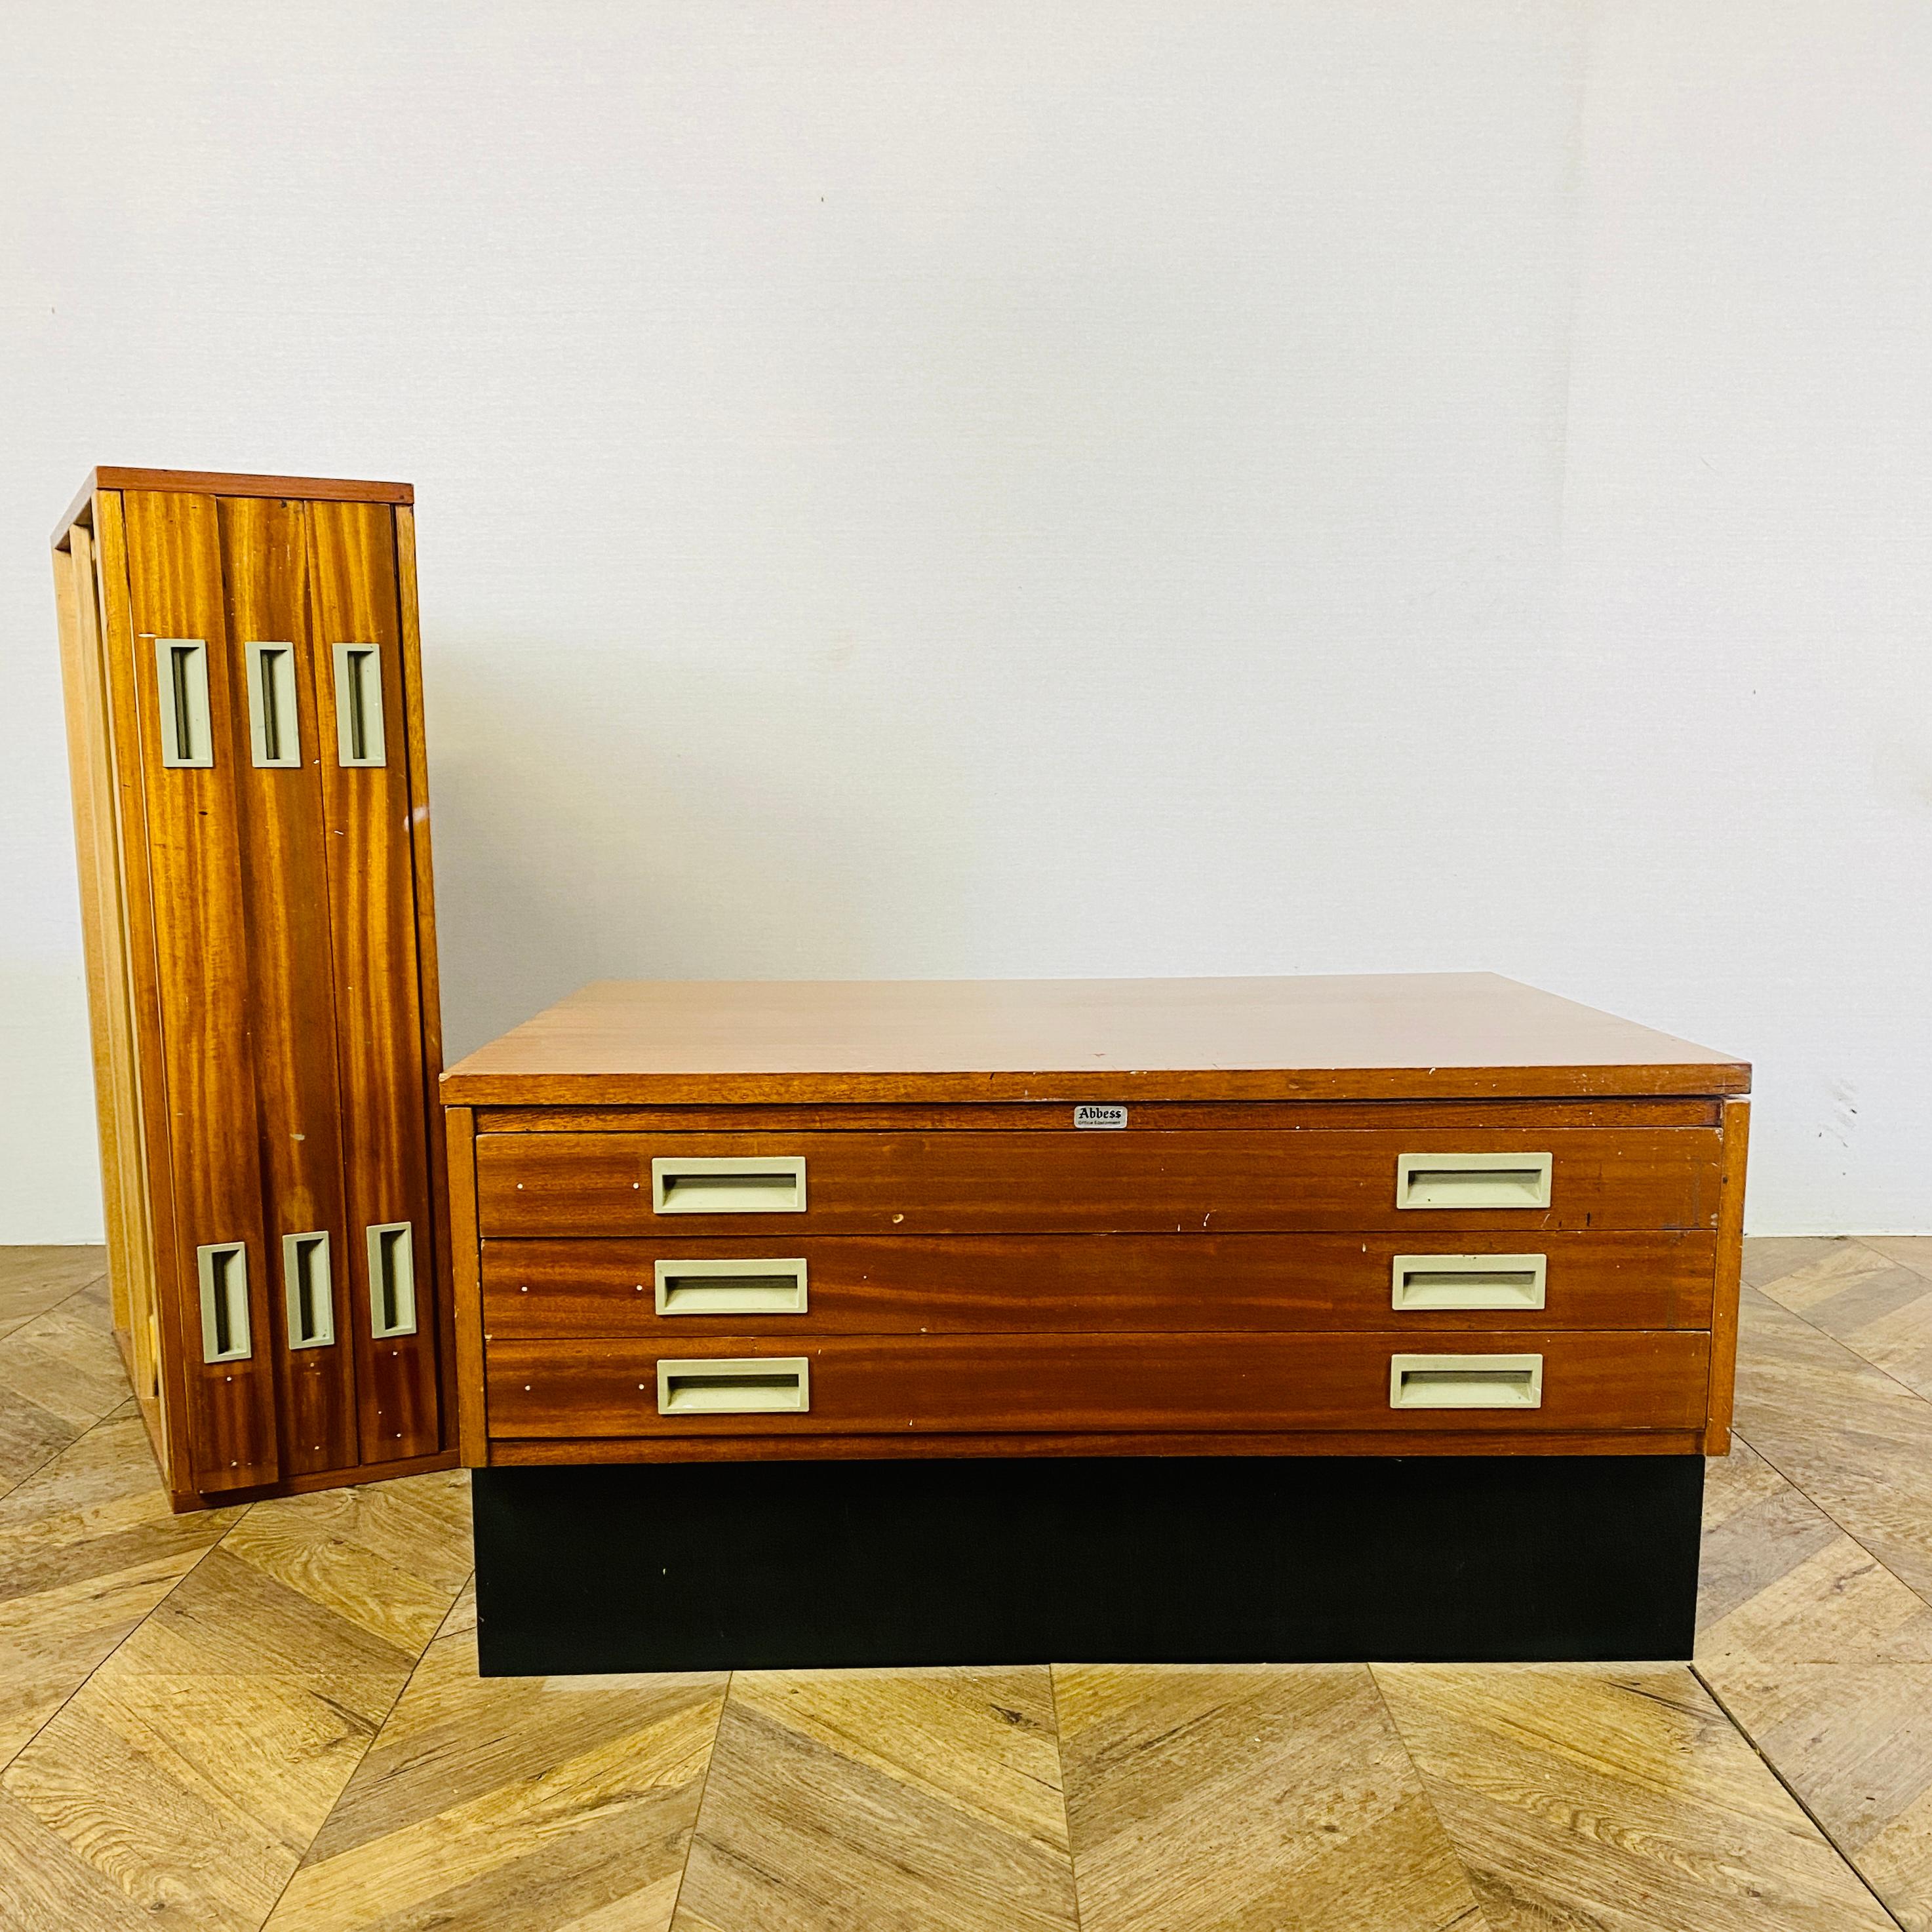 Large Vintage Architects plan chest, with 6 Drawers, circa 1960s.

The chest, which originated from the University of Cambridge is in good vintage condition with age related marks and scuffs, which really add to its patina and charm but does not